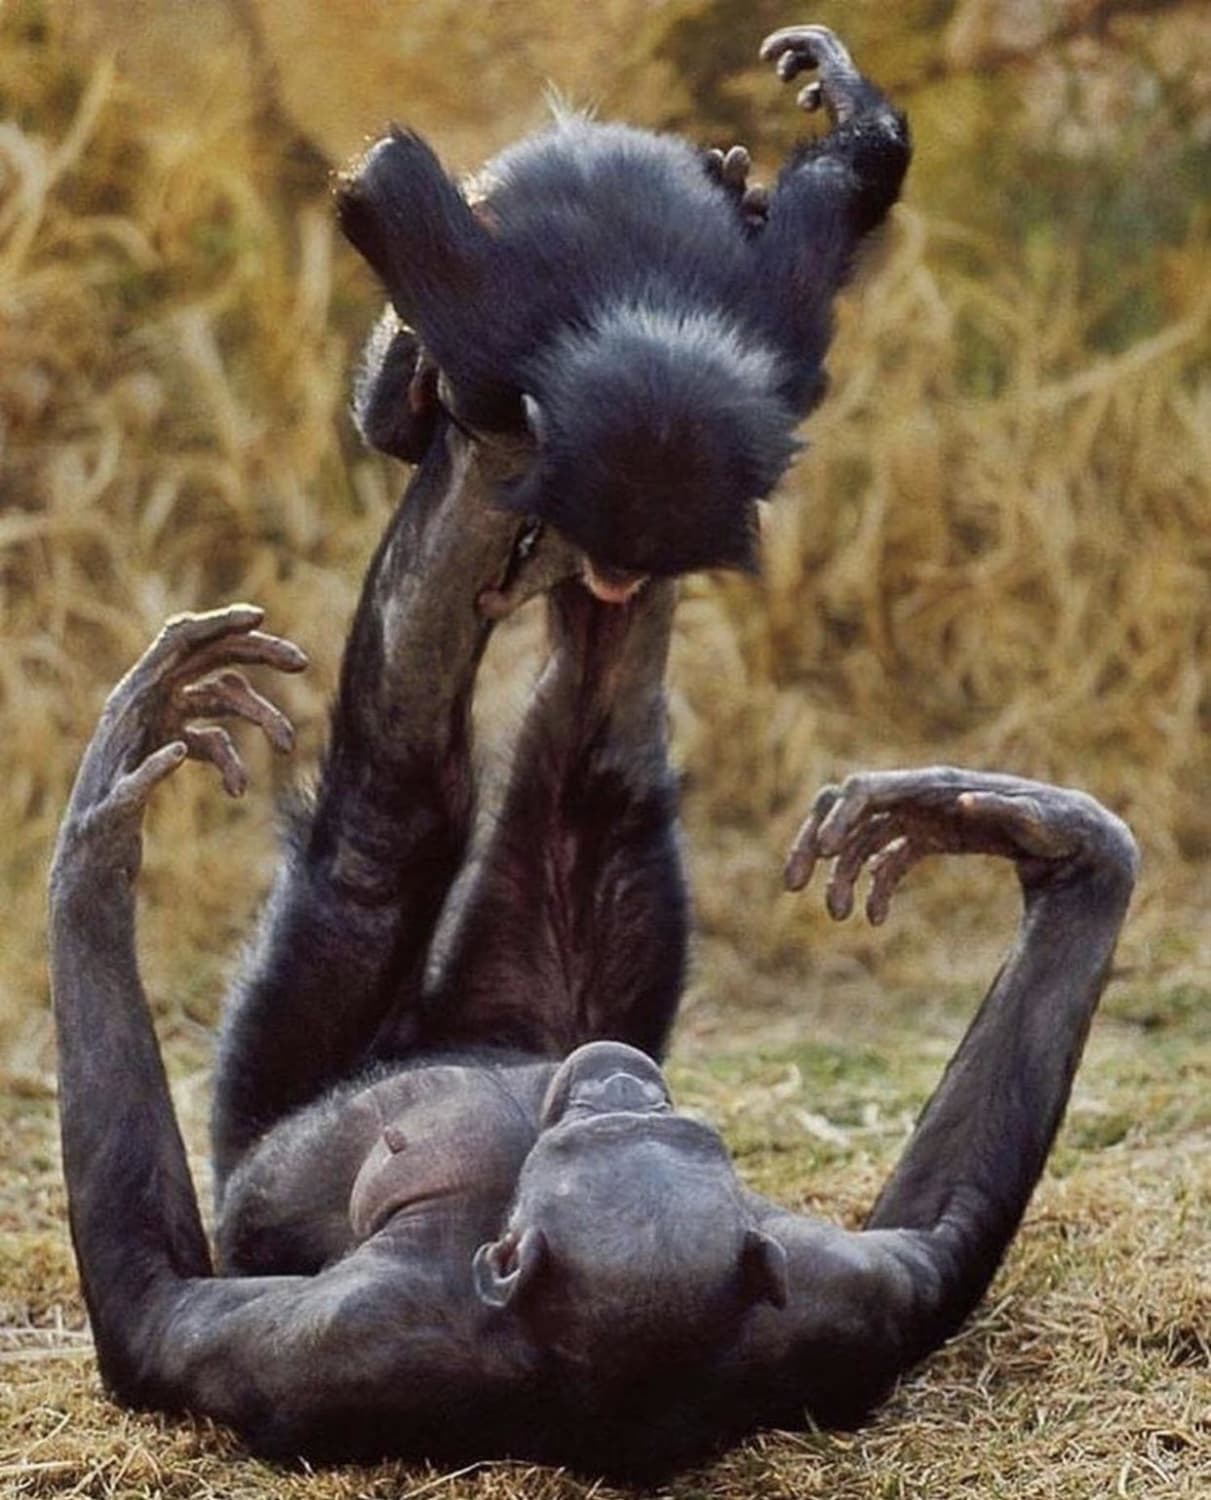 This Female Bonobo playing with her daughter on her legs, something many of us do or have done with our young ones.